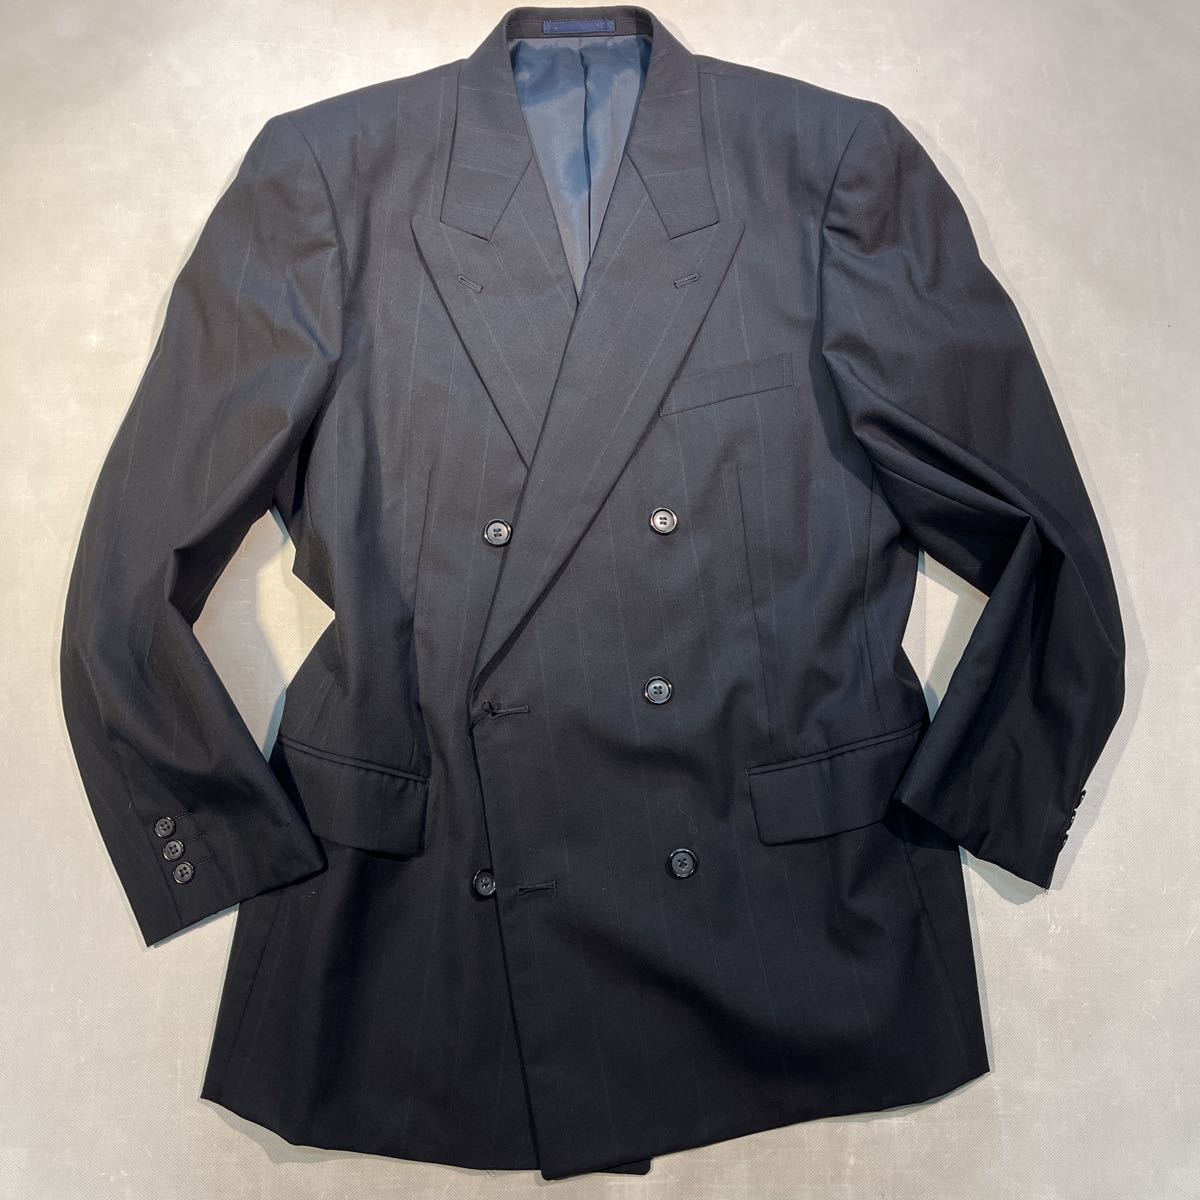  new goods with translation [ size A6 L* summer double-breasted suit ]4B double-breasted suit navy series unlined in the back side Benz 2 tuck . wide setup stripe suit 